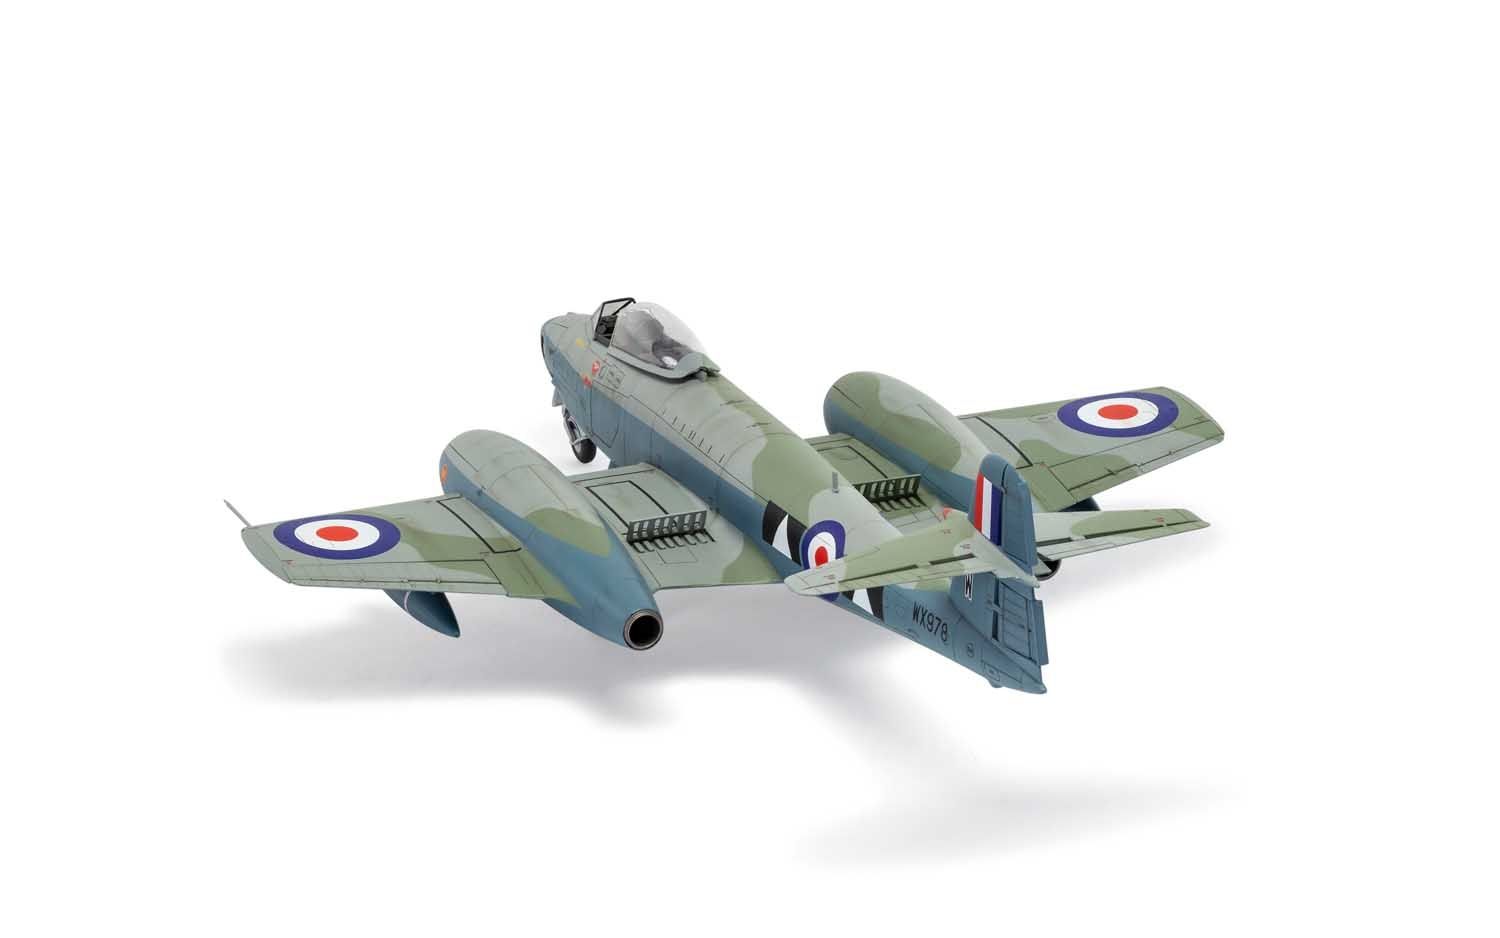 A09188 Airfix | Gloster Meteor FR.9 - plastic model kit